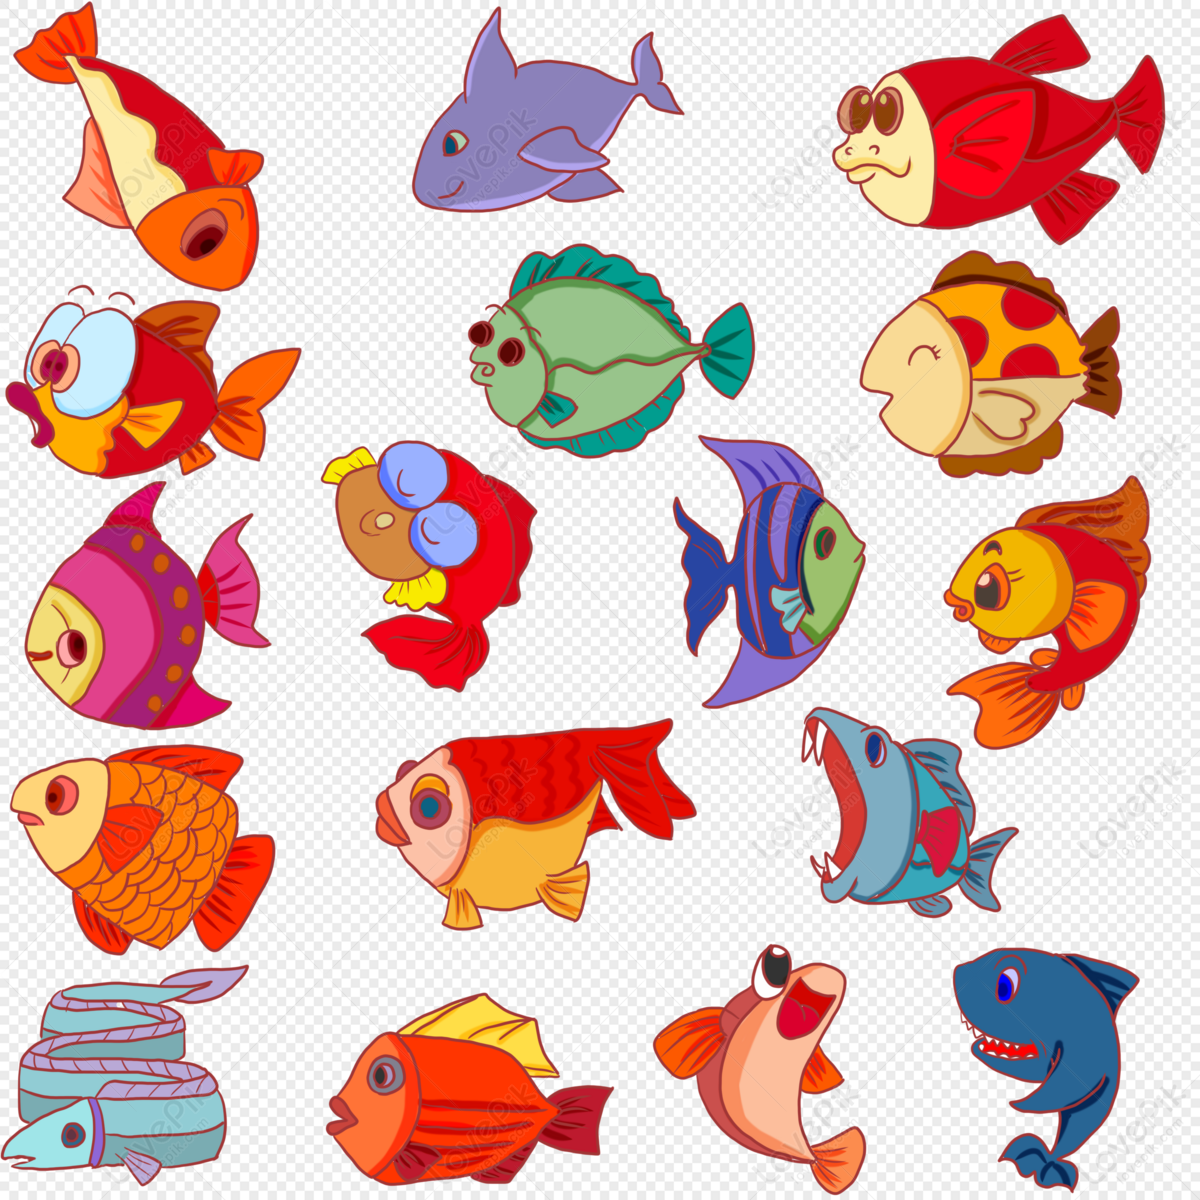 Fish, Colorful Fish, Art Painting, Fish Fishes PNG Free Download